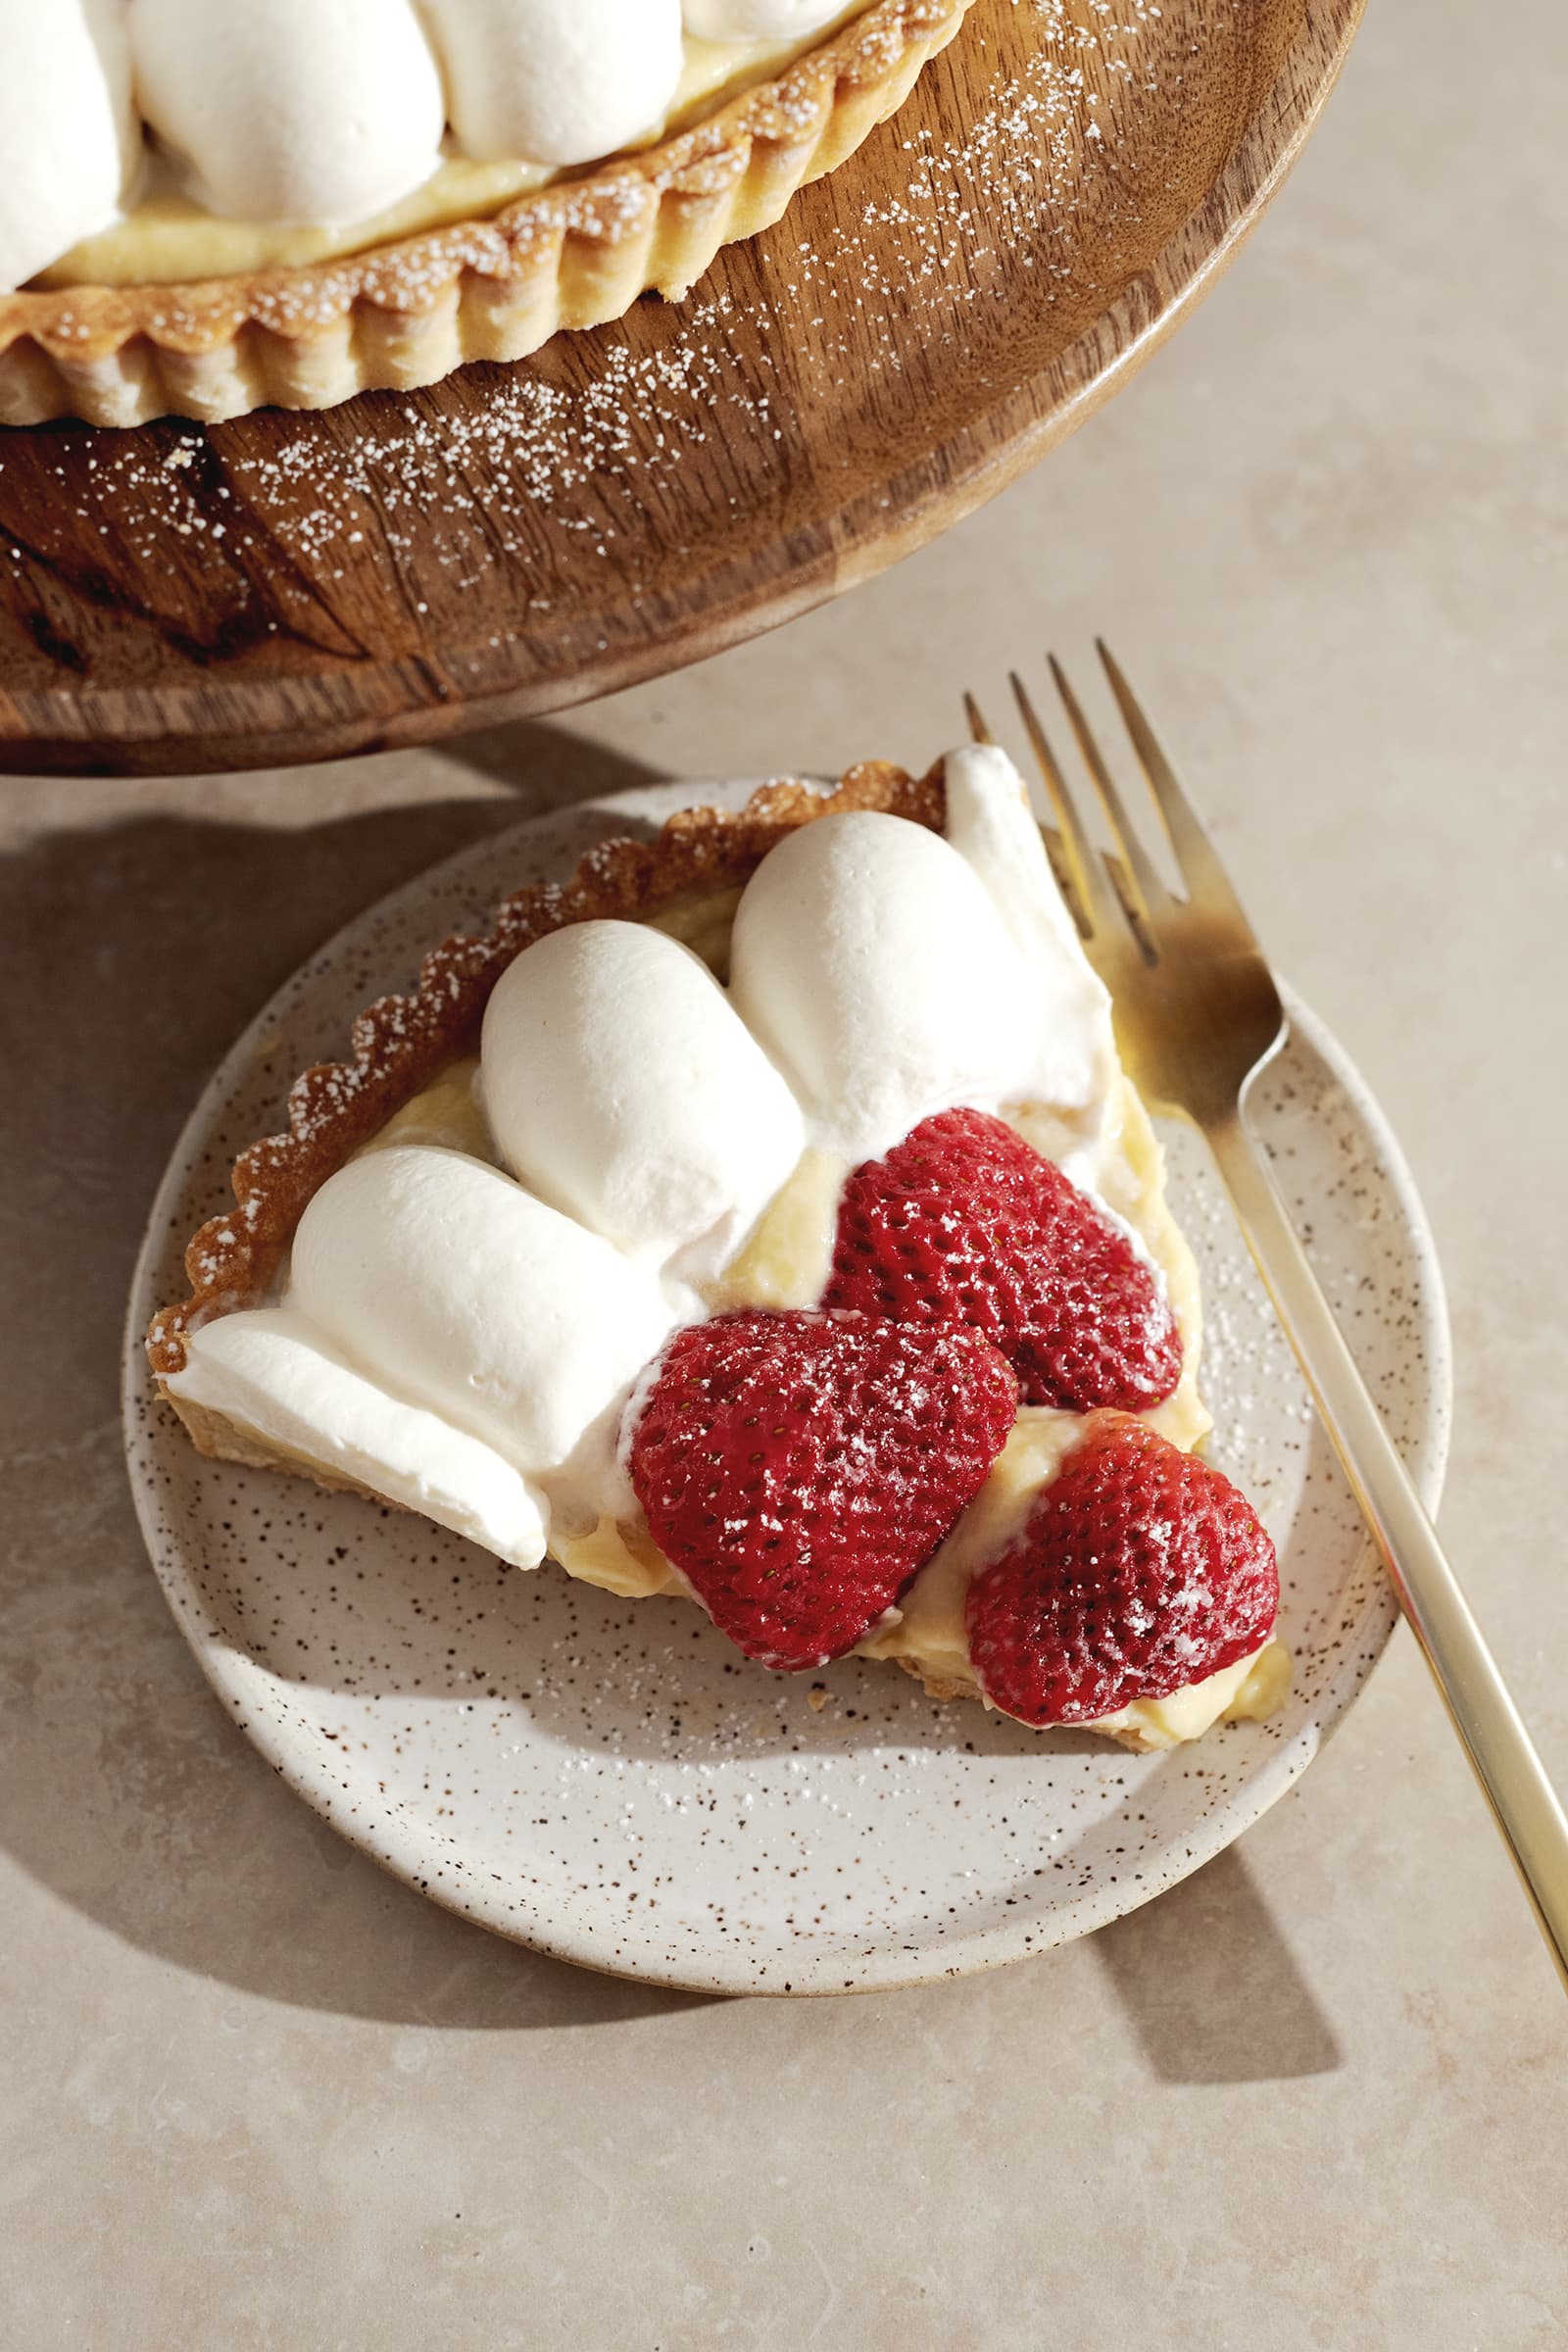 A slice of strawberry tart on a speckled plate with a gold fork.